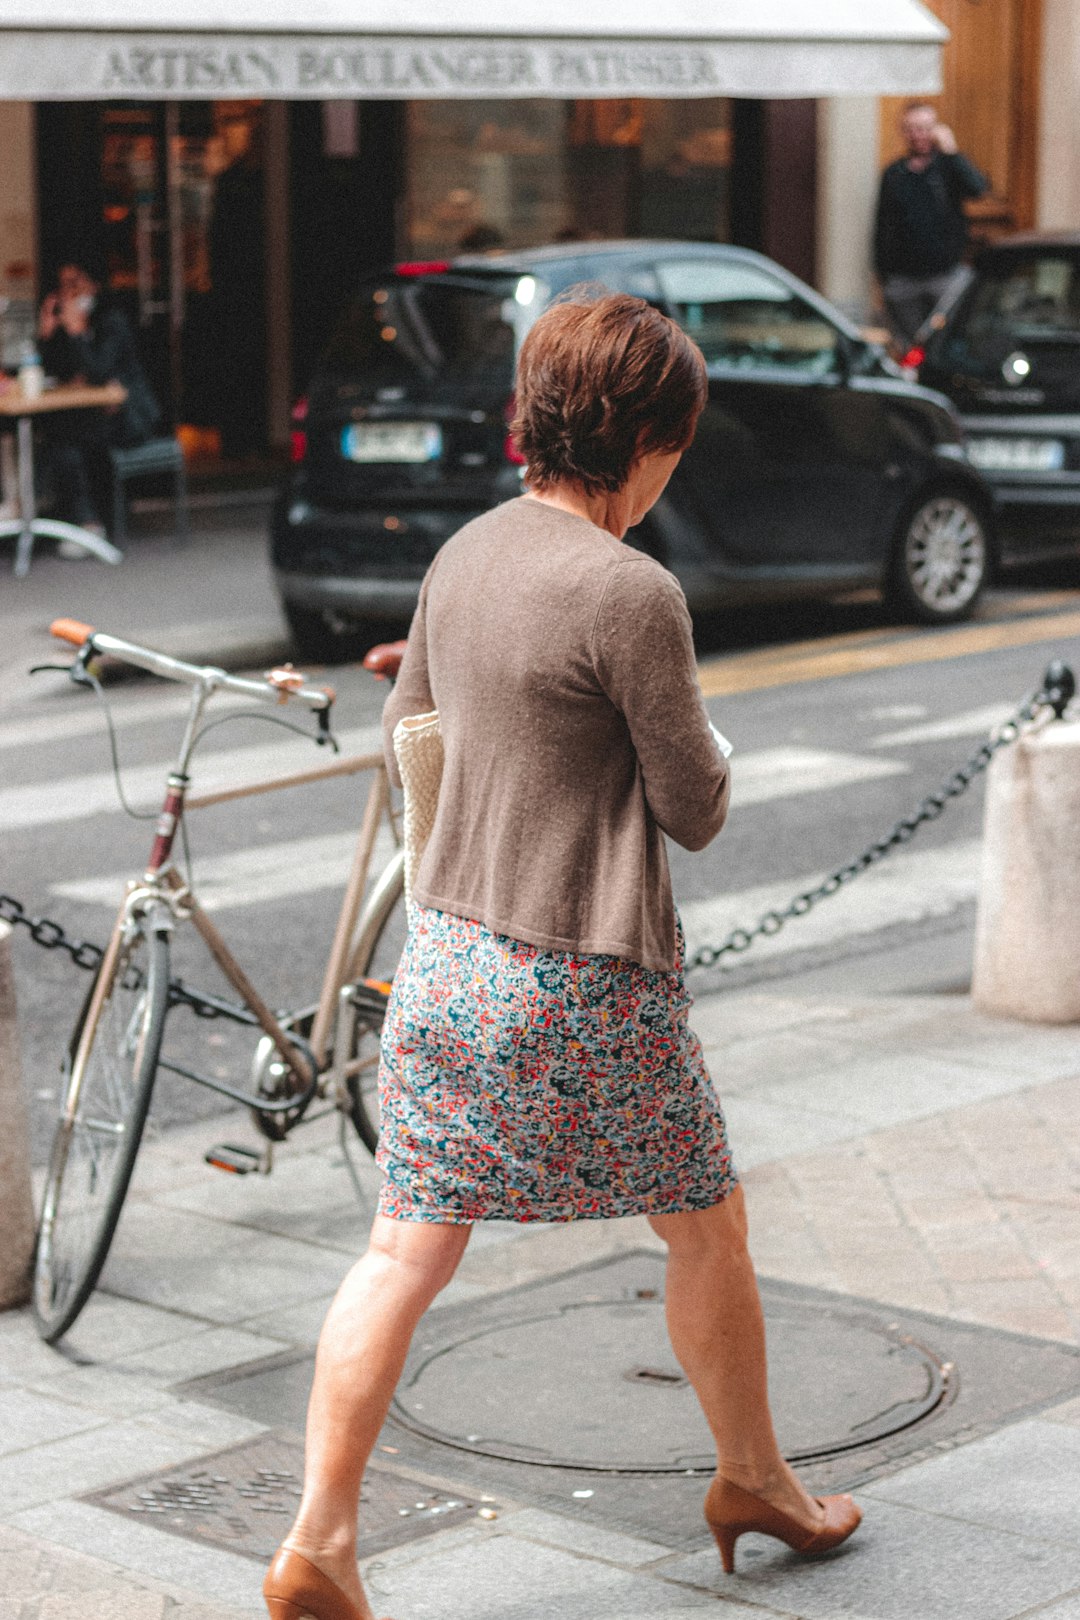 woman in brown long sleeve shirt and blue and white floral skirt standing on sidewalk during